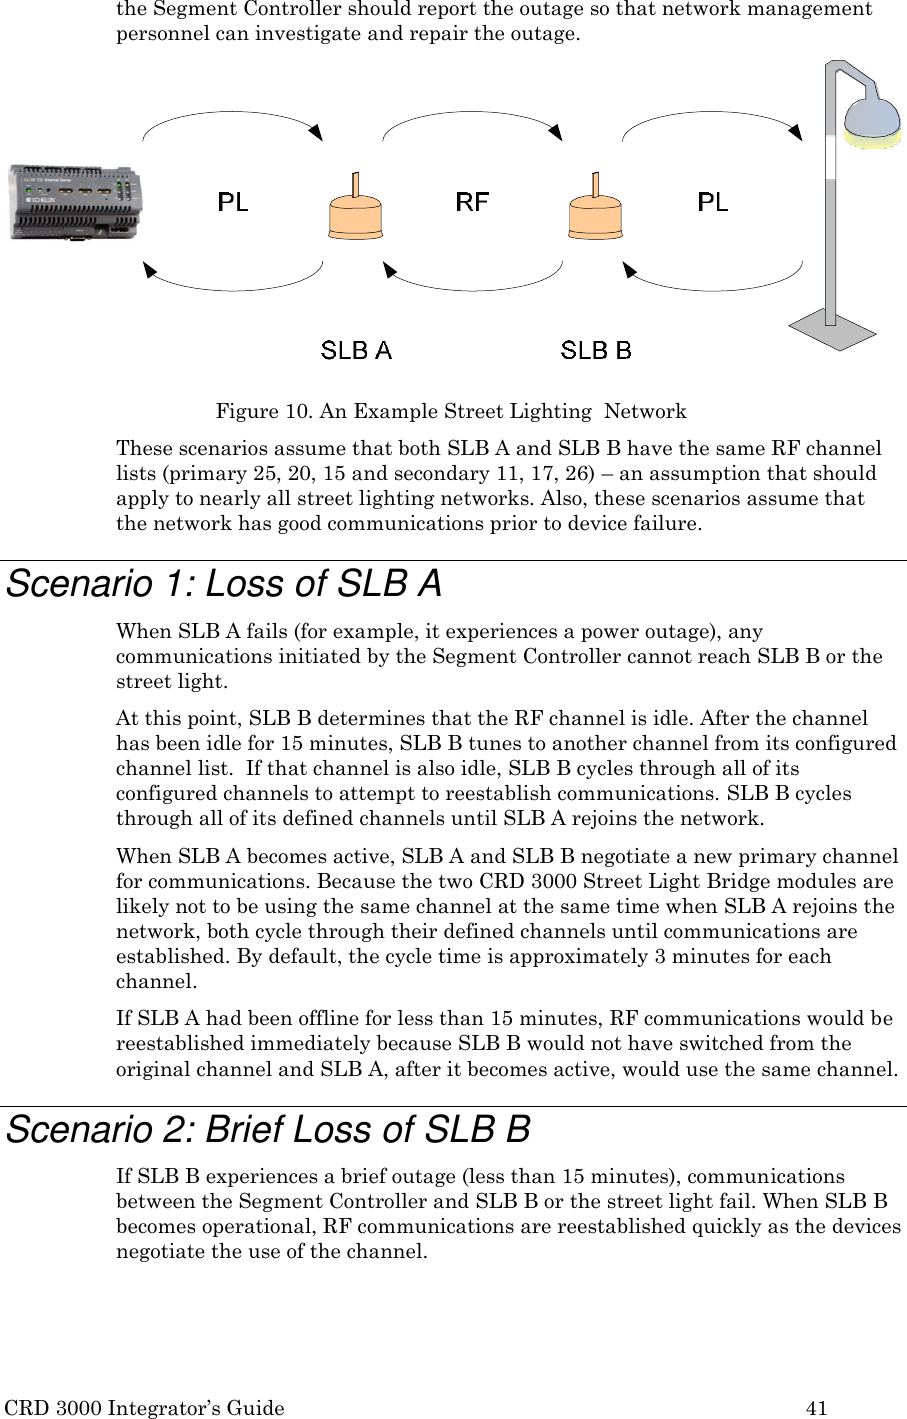 CRD 3000 Integrator’s Guide 41  the Segment Controller should report the outage so that network management personnel can investigate and repair the outage.               Figure 10. An Example Street Lighting  Network These scenarios assume that both SLB A and SLB B have the same RF channel lists (primary 25, 20, 15 and secondary 11, 17, 26) – an assumption that should apply to nearly all street lighting networks. Also, these scenarios assume that the network has good communications prior to device failure.  Scenario 1: Loss of SLB A When SLB A fails (for example, it experiences a power outage), any communications initiated by the Segment Controller cannot reach SLB B or the street light. At this point, SLB B determines that the RF channel is idle. After the channel has been idle for 15 minutes, SLB B tunes to another channel from its configured channel list.  If that channel is also idle, SLB B cycles through all of its configured channels to attempt to reestablish communications. SLB B cycles through all of its defined channels until SLB A rejoins the network. When SLB A becomes active, SLB A and SLB B negotiate a new primary channel for communications. Because the two CRD 3000 Street Light Bridge modules are likely not to be using the same channel at the same time when SLB A rejoins the network, both cycle through their defined channels until communications are established. By default, the cycle time is approximately 3 minutes for each channel. If SLB A had been offline for less than 15 minutes, RF communications would be reestablished immediately because SLB B would not have switched from the original channel and SLB A, after it becomes active, would use the same channel.  Scenario 2: Brief Loss of SLB B If SLB B experiences a brief outage (less than 15 minutes), communications between the Segment Controller and SLB B or the street light fail. When SLB B becomes operational, RF communications are reestablished quickly as the devices negotiate the use of the channel. 